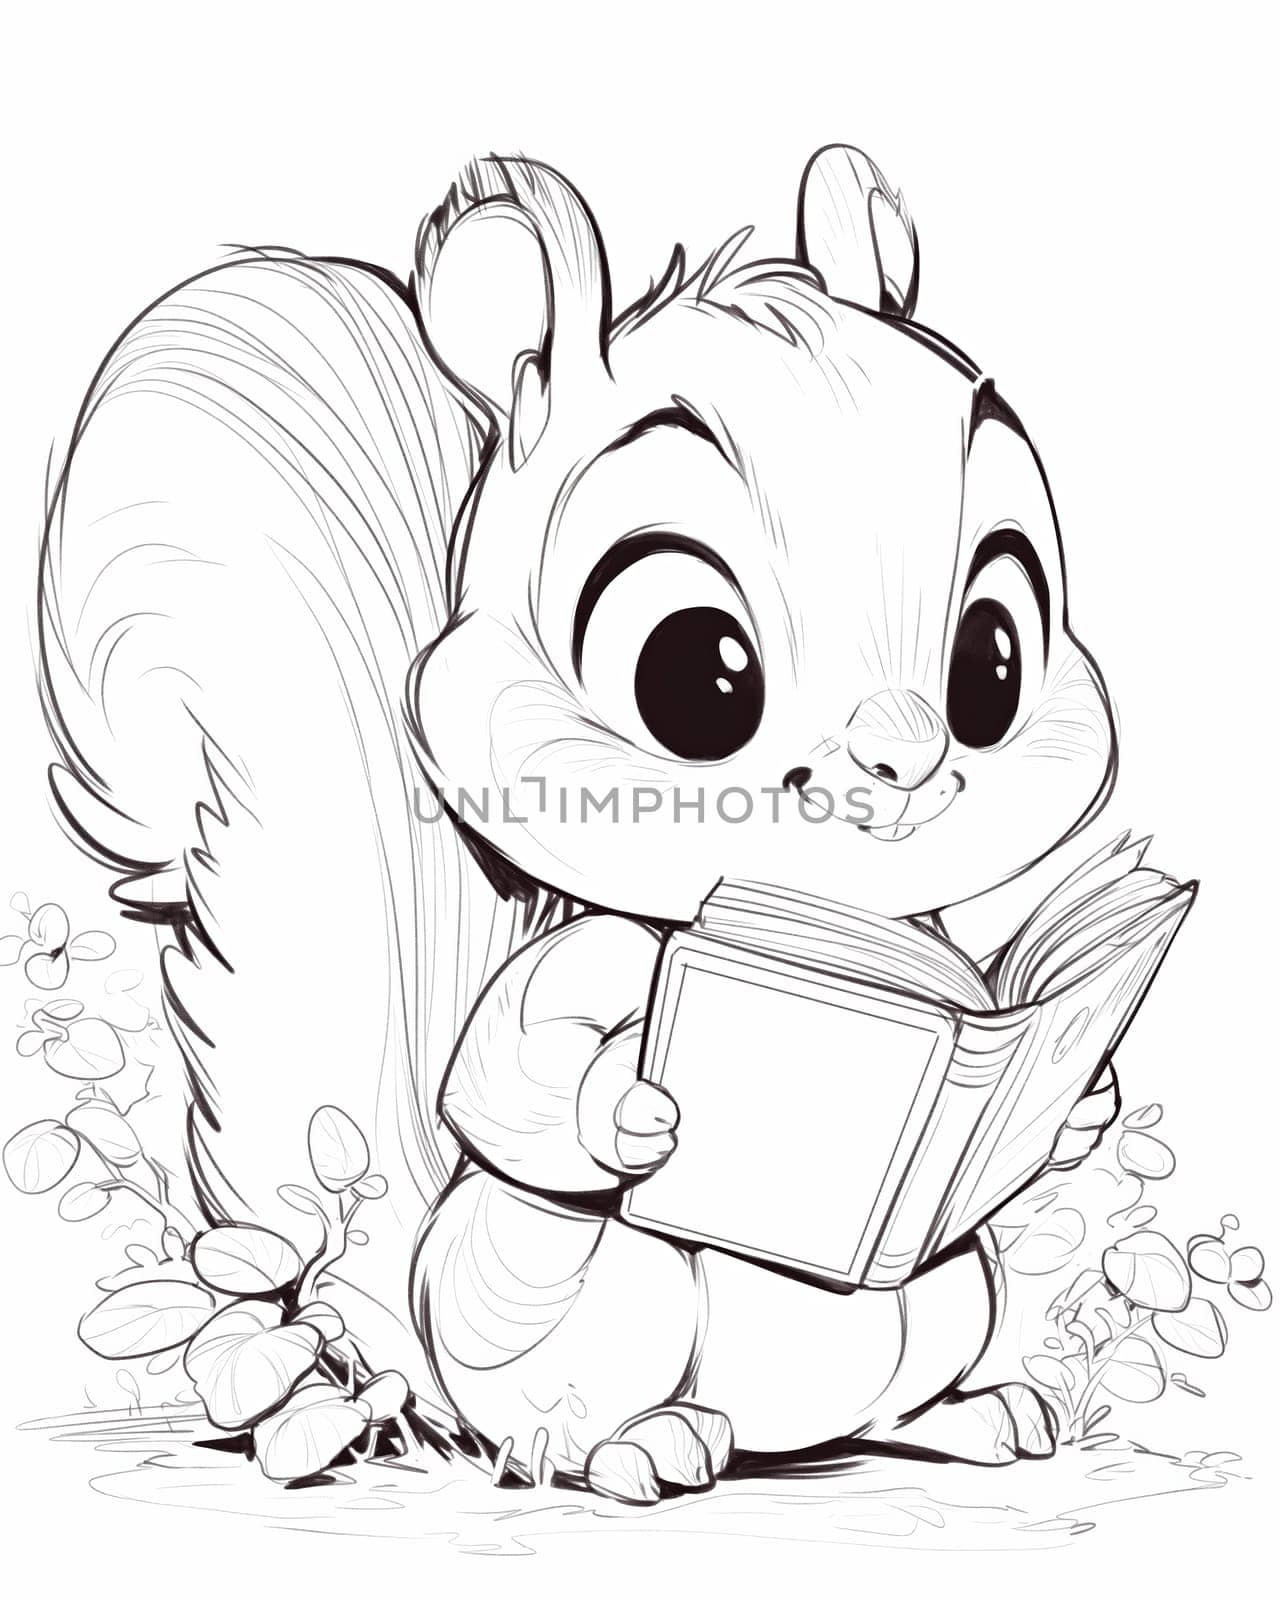 Coloring book for children, coloring animal, squirrel. by Fischeron